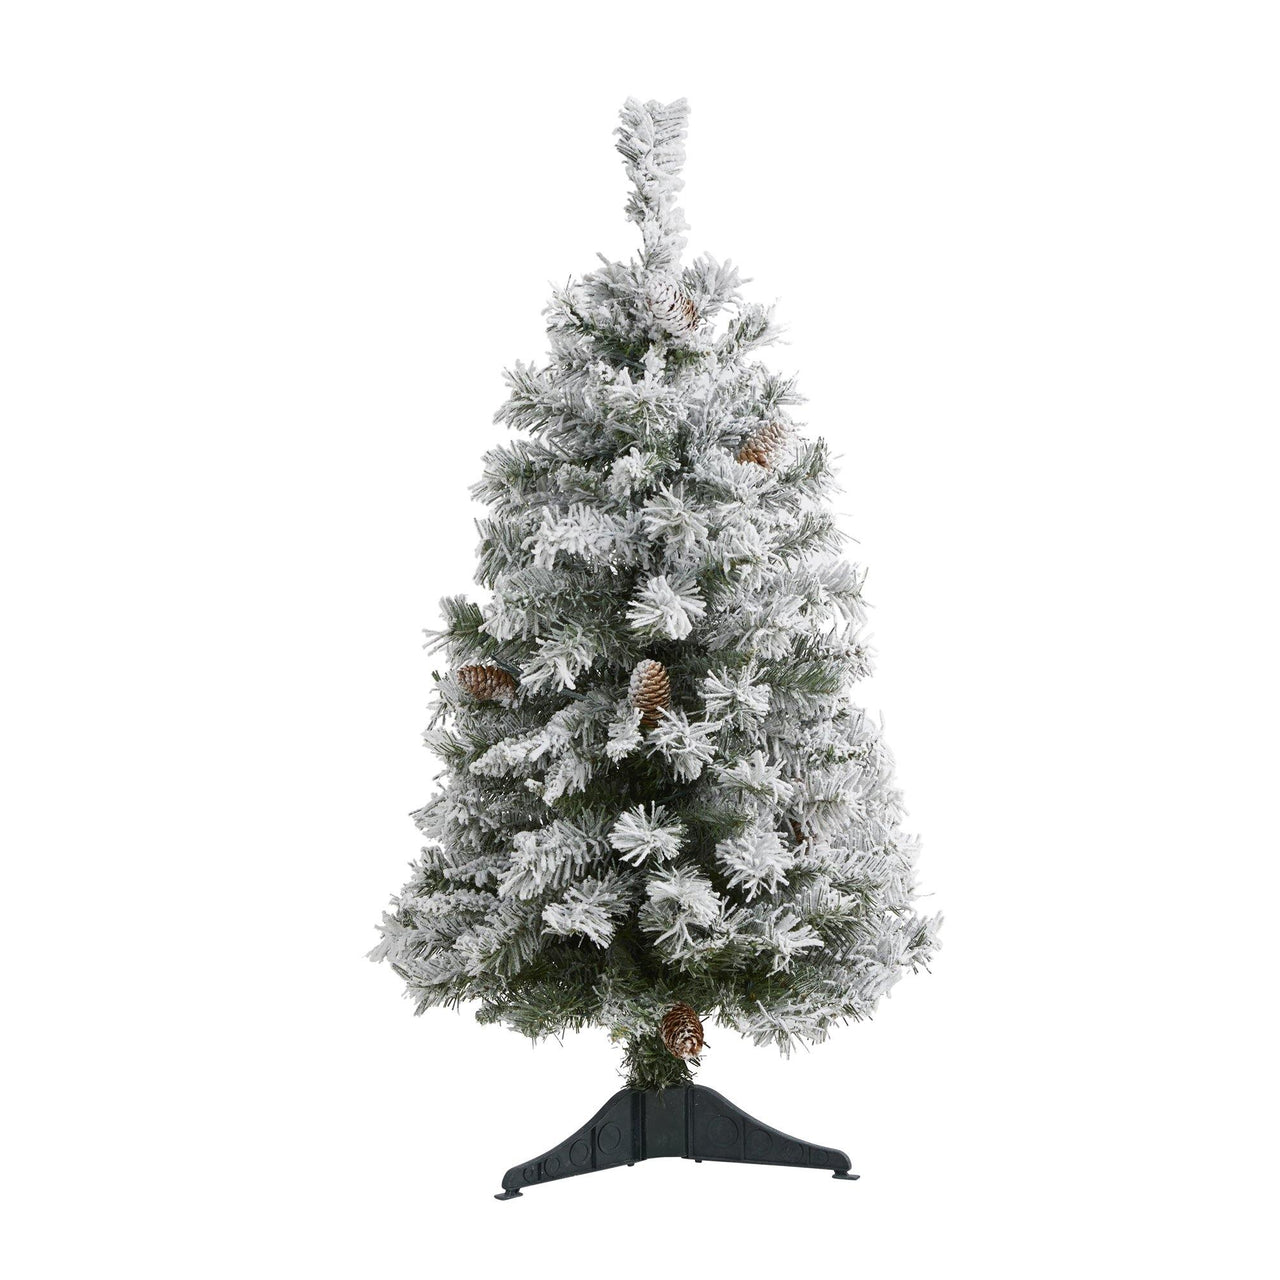 3' Flocked White River Mountain Pine Artificial Christmas Tree with Pinecones